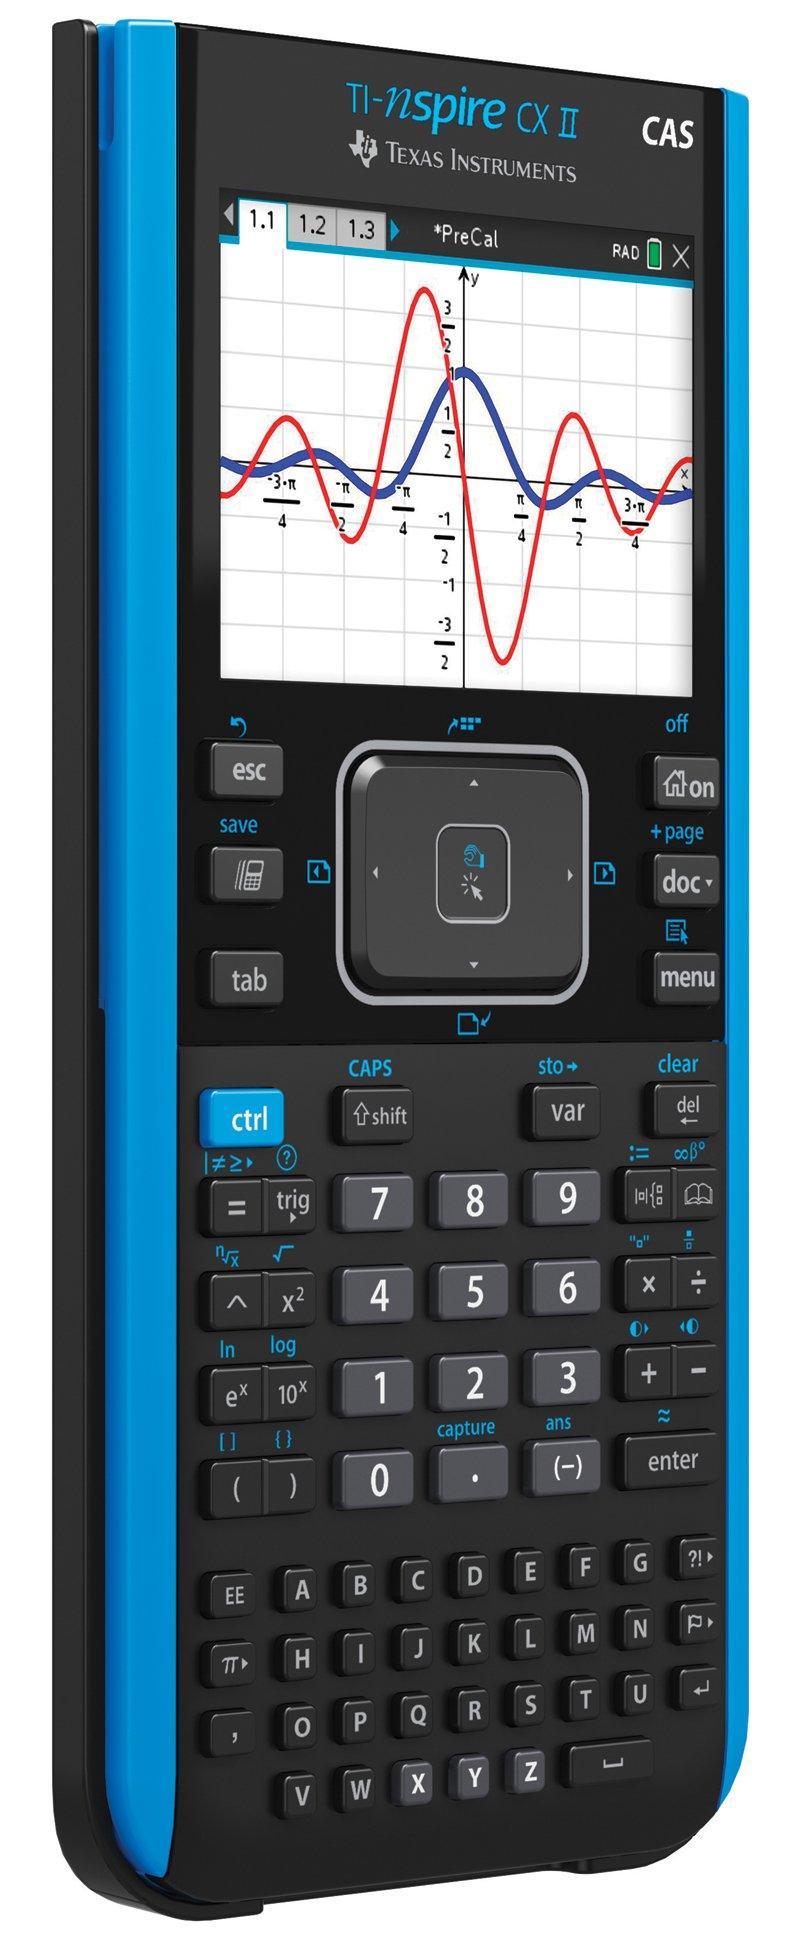 TI-Nspire CX II CAS Graphing Calculator - Teacher's Pack of 10 - Underwood Distributing Co.